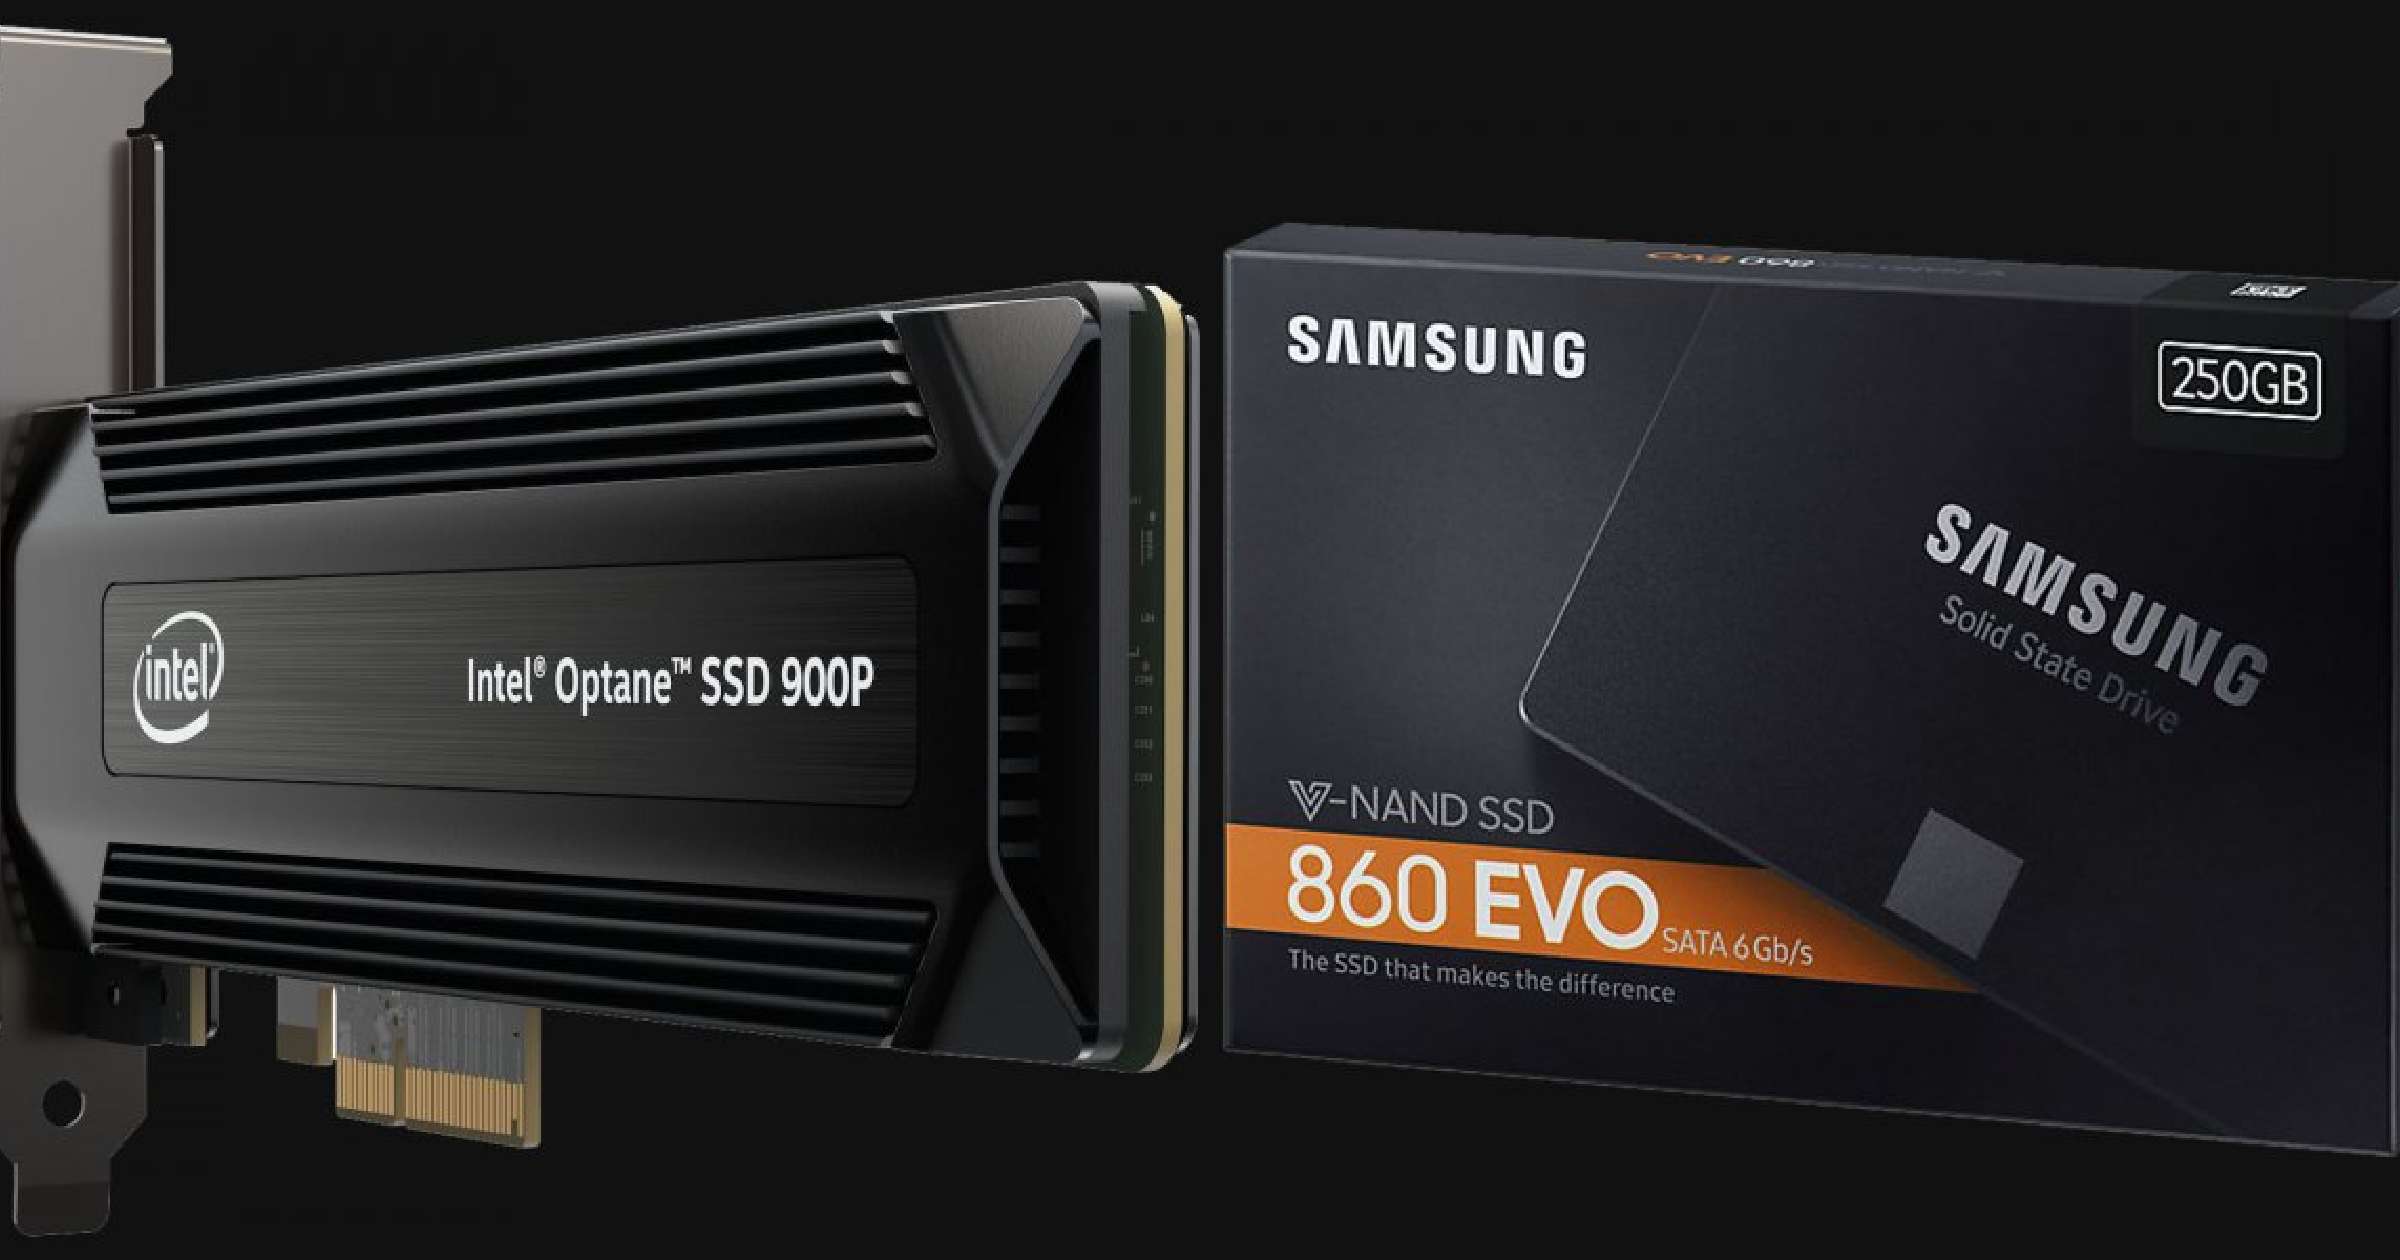 Is 256GB SSD For Gaming? | GamePro